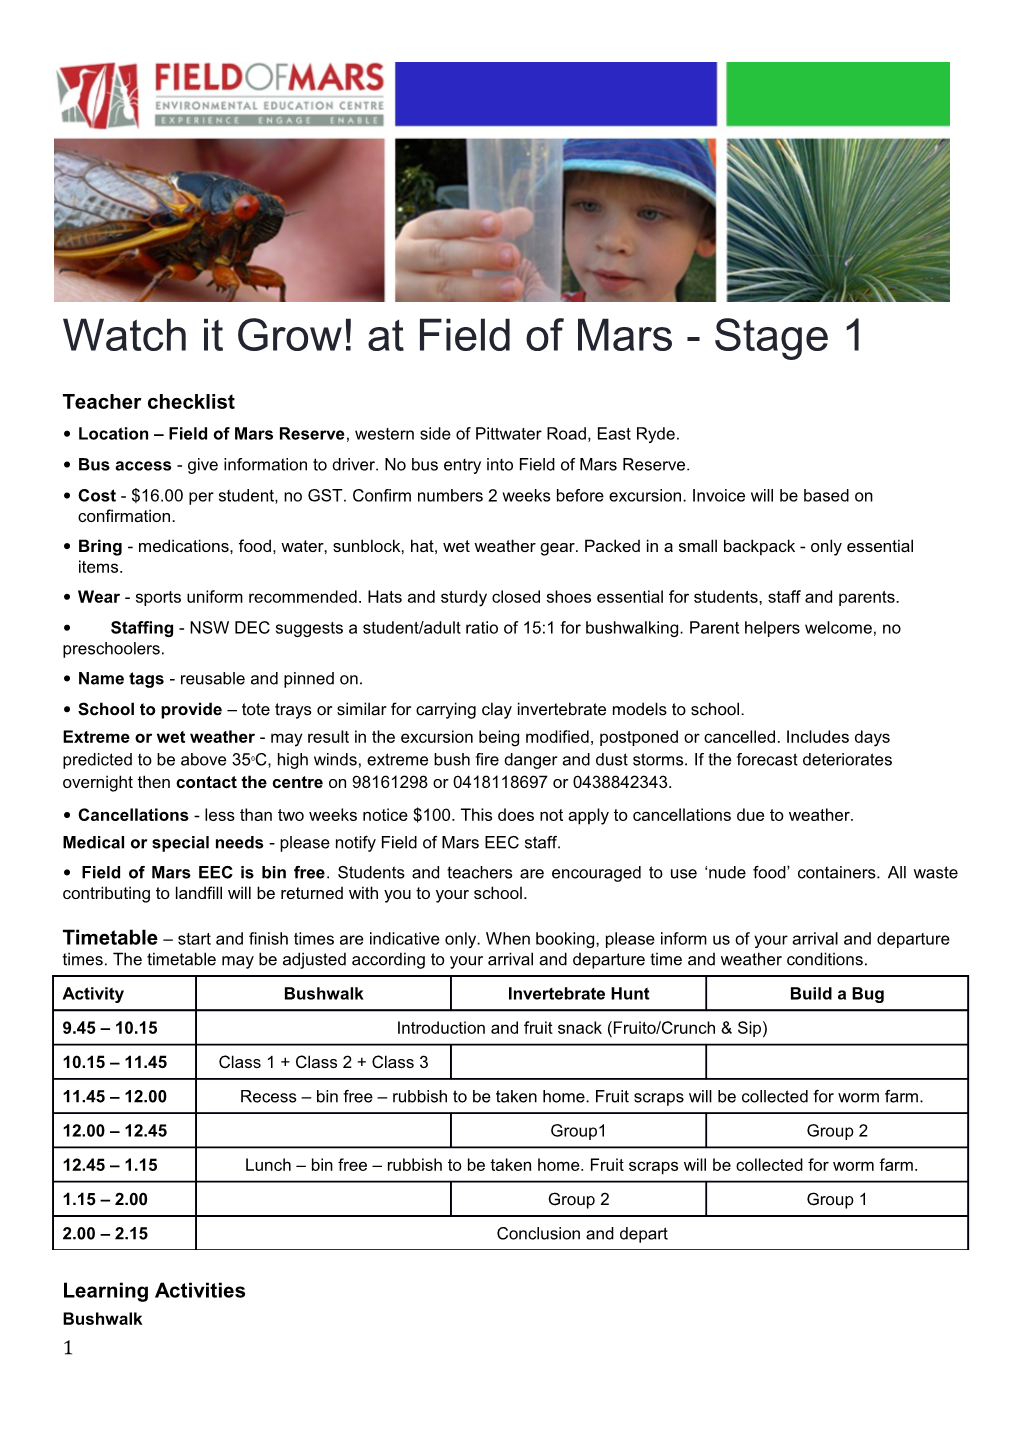 Watch It Grow!At Field of Mars - Stage 1